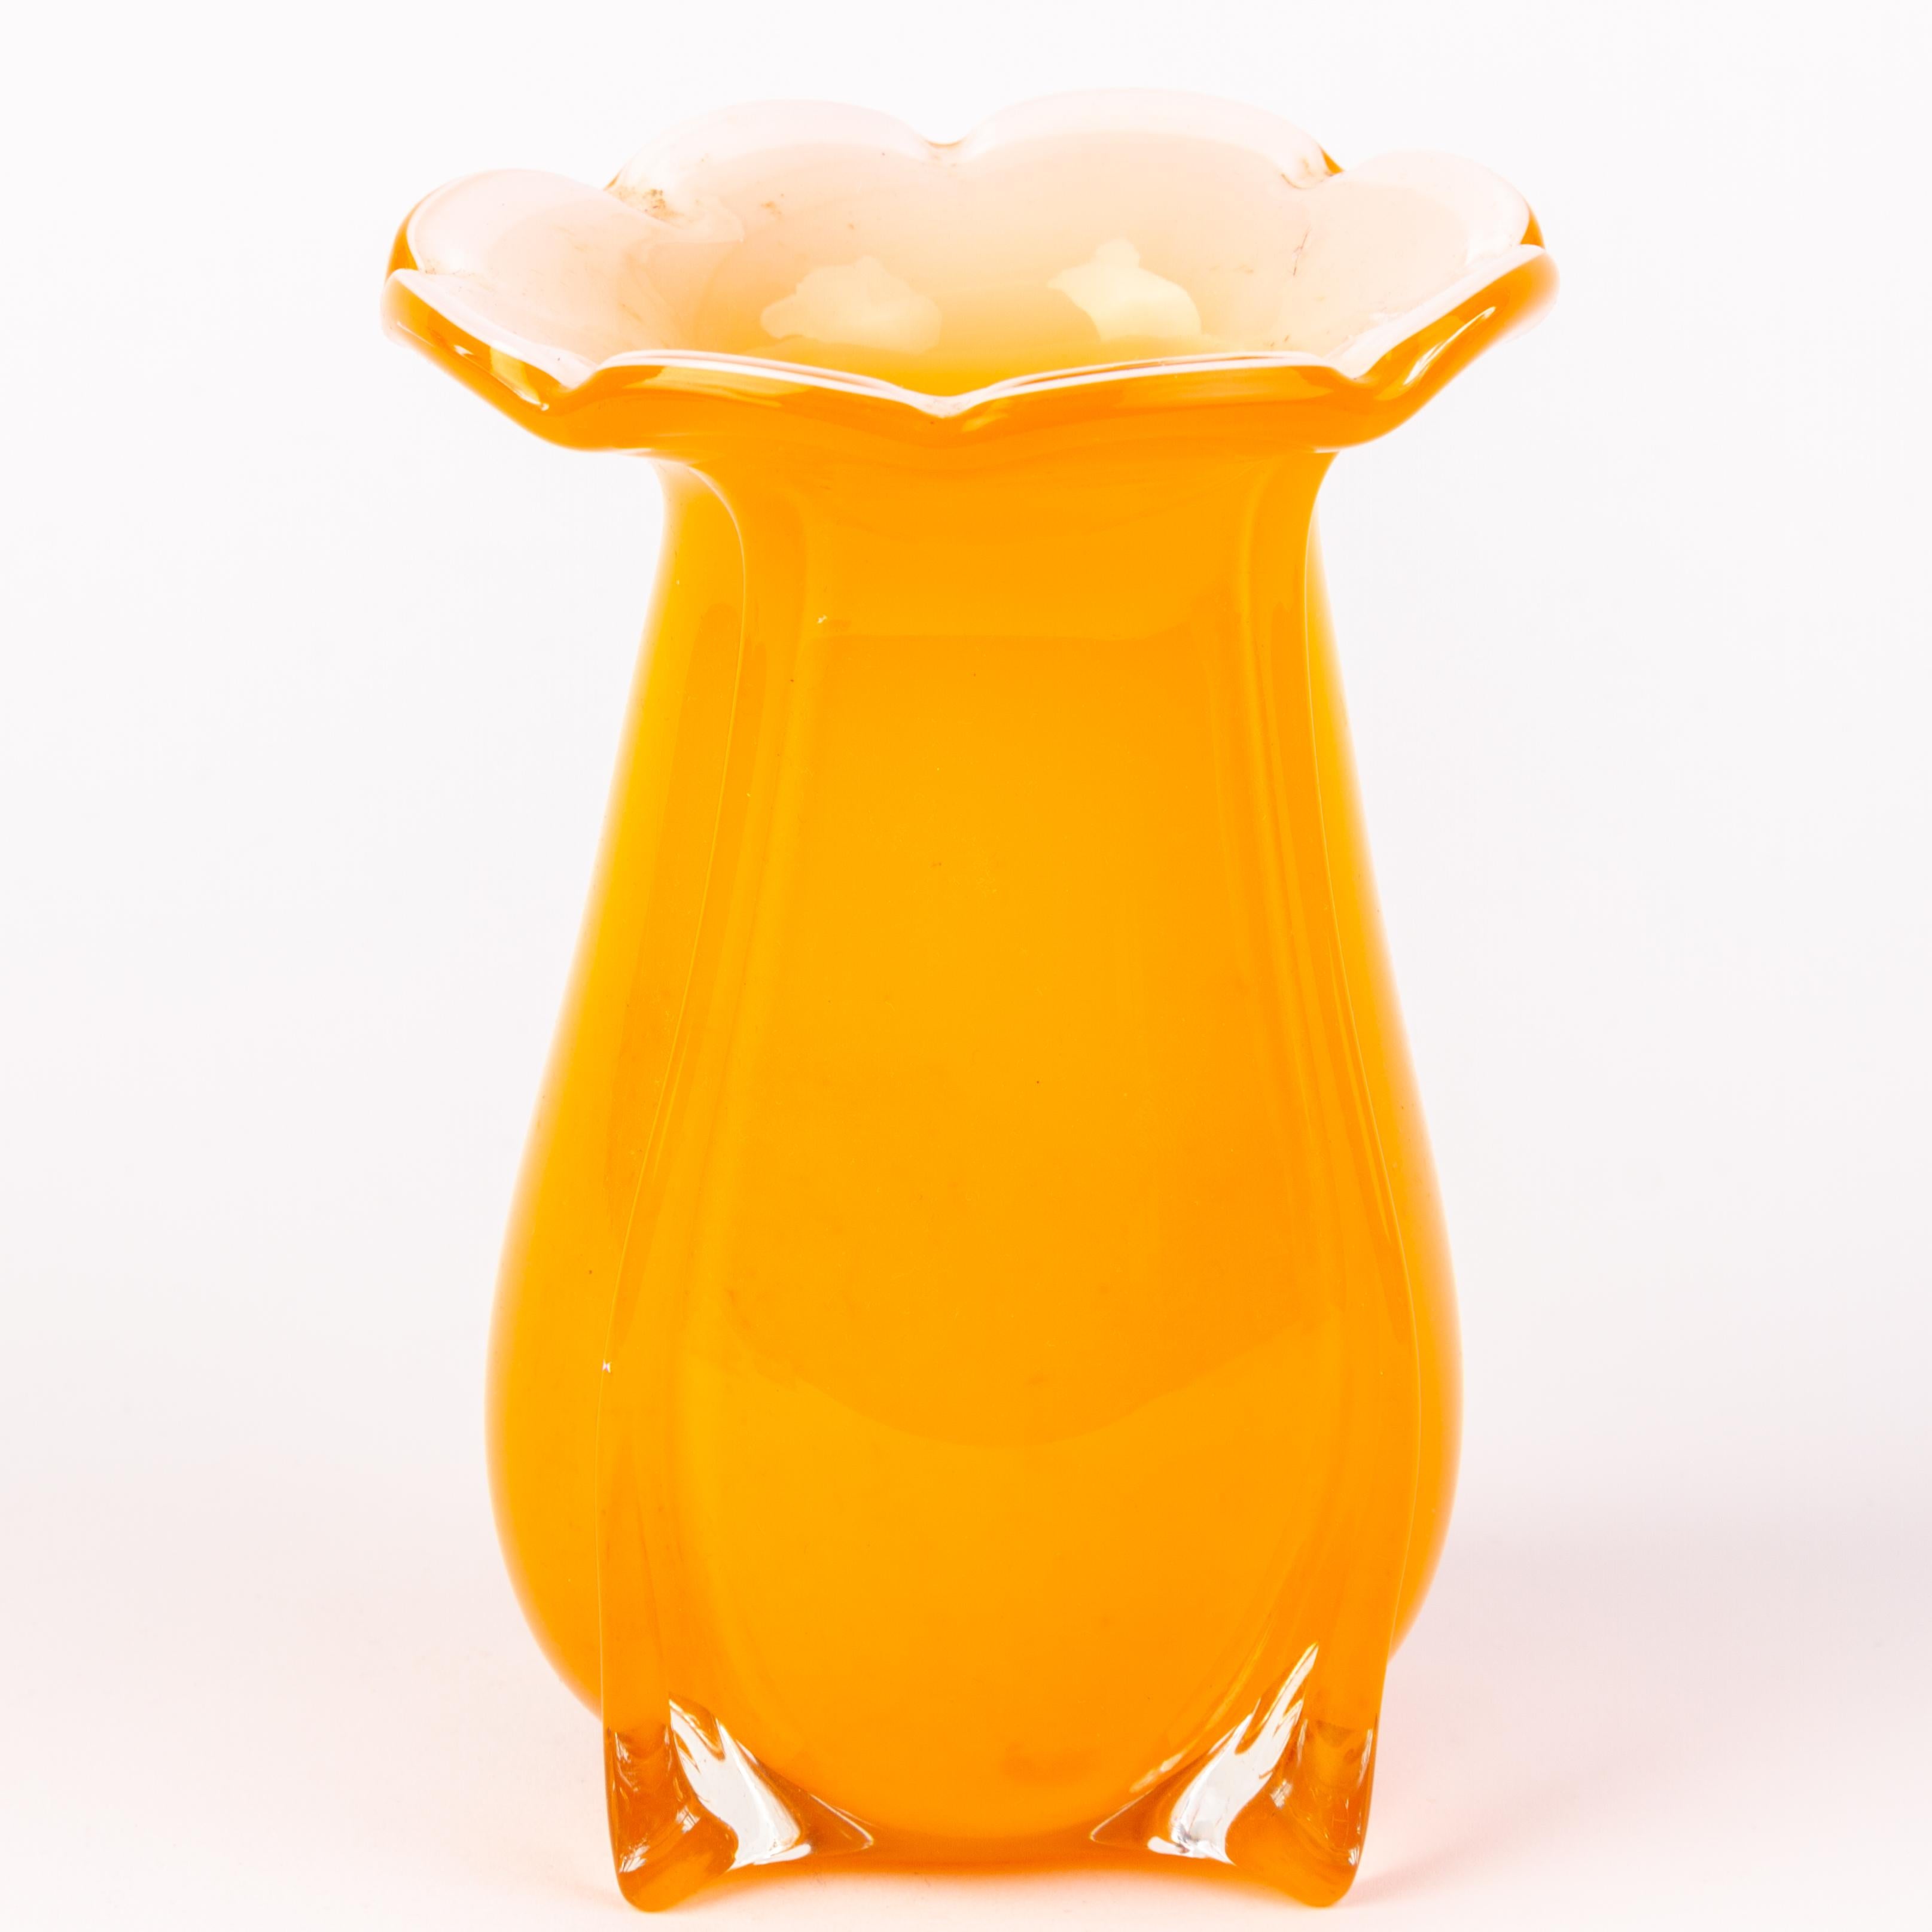 In good condition
From a private collection
Manner of Loetz Czech Orange Tango Glass Art Deco Vase
